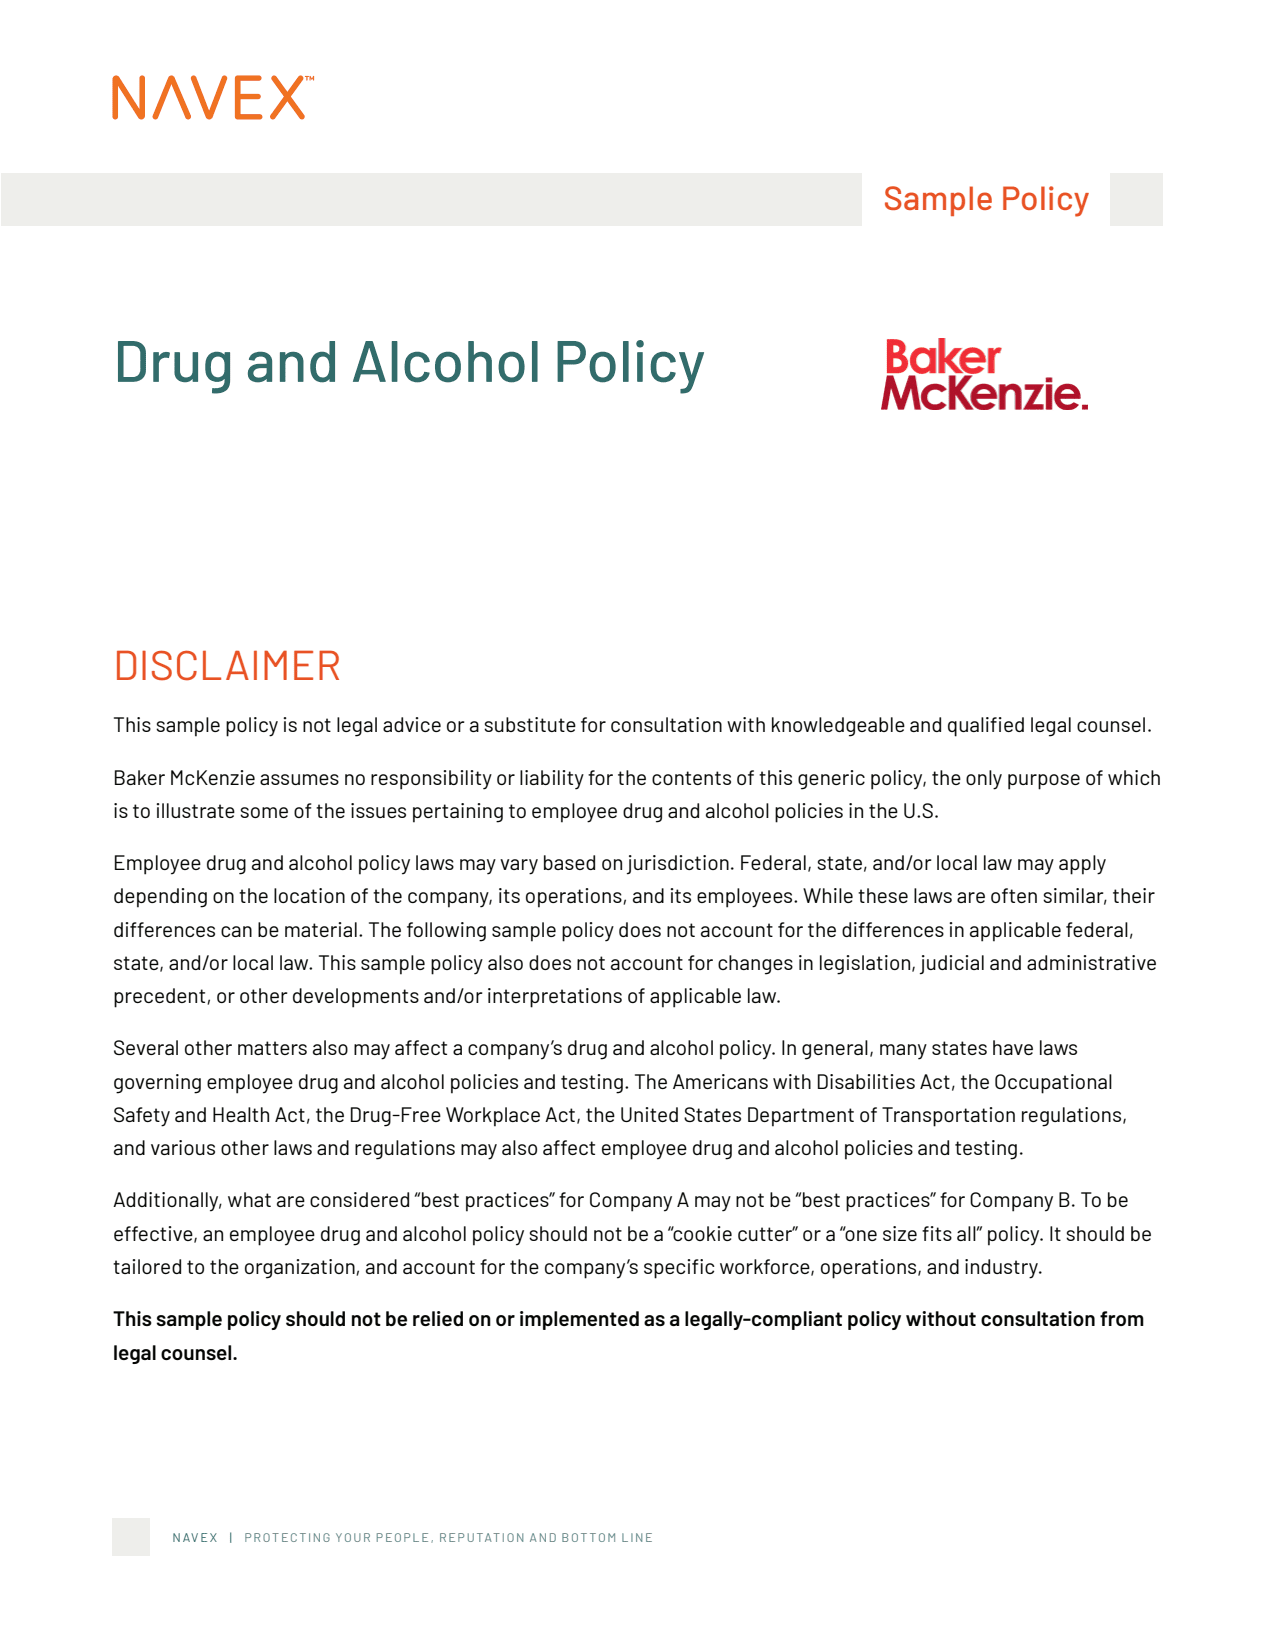 Drug and Alcohol Policy Sample Policy